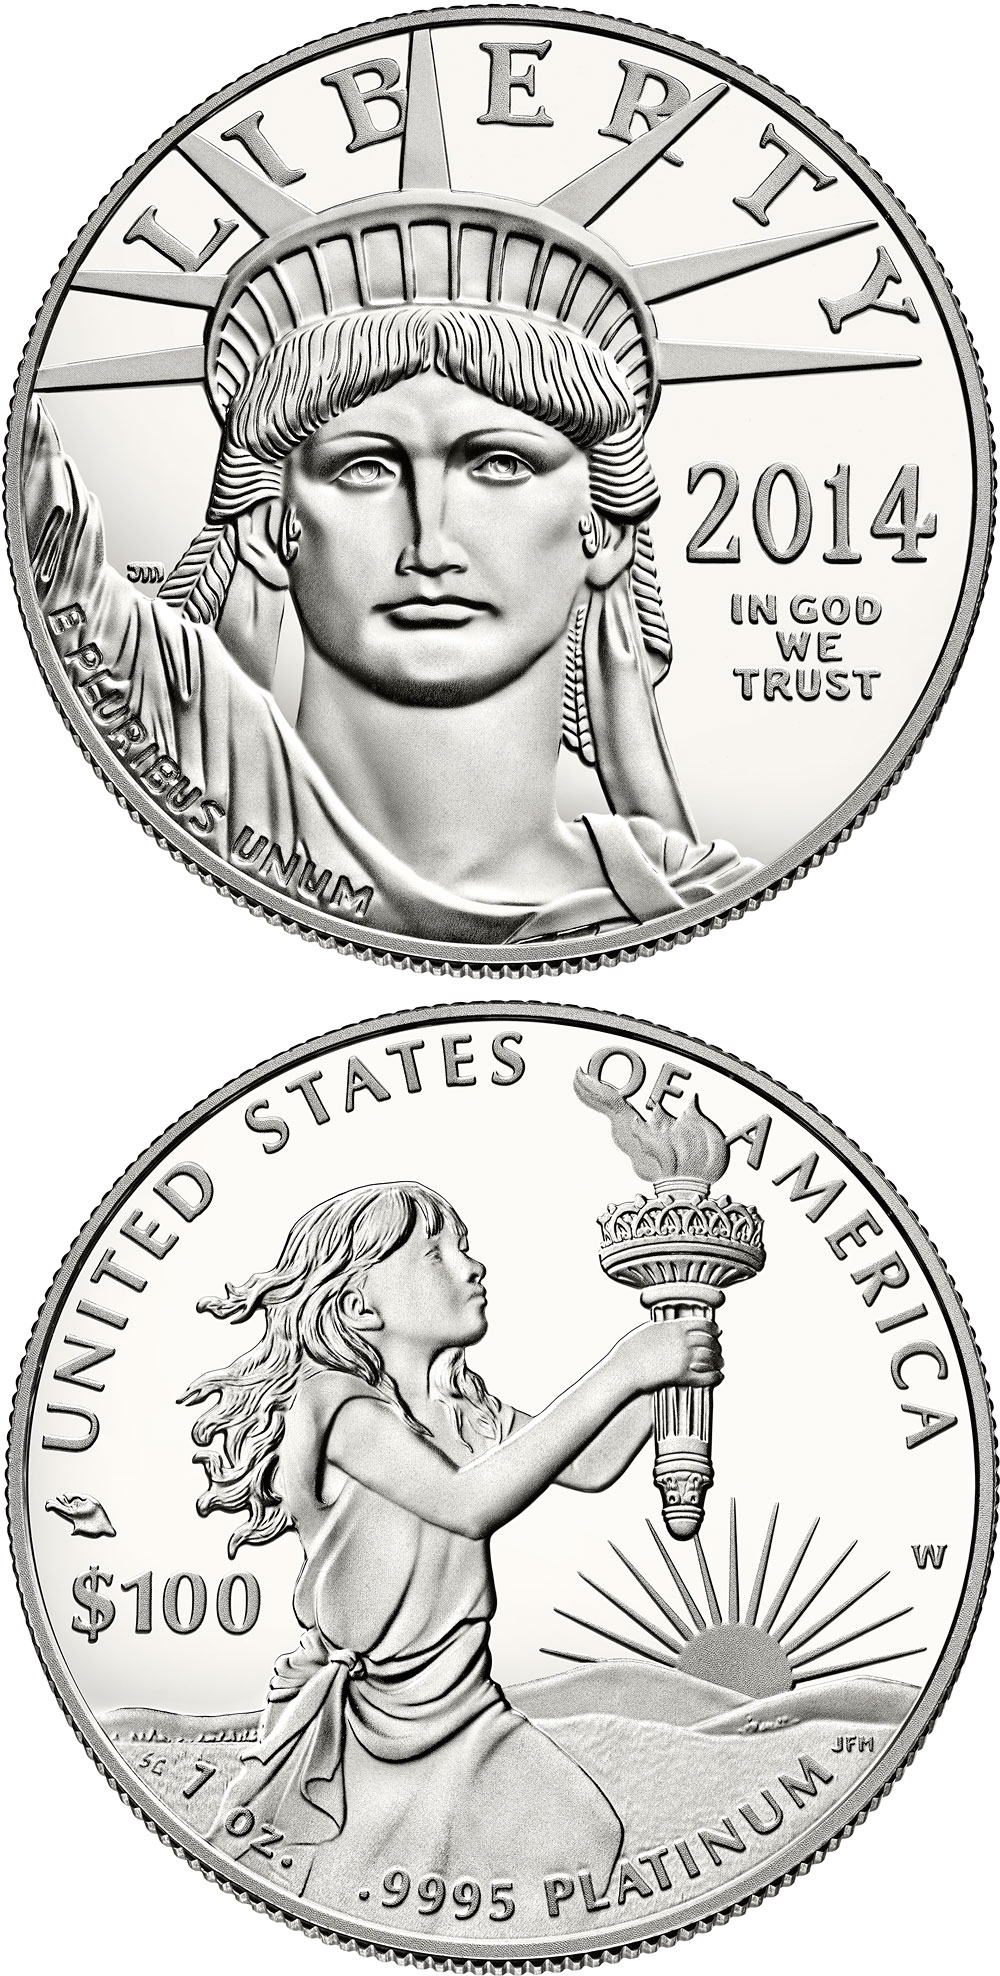 Image of 100 dollars coin - American Eagle Platinum One Ounce Proof Coin | USA 2014